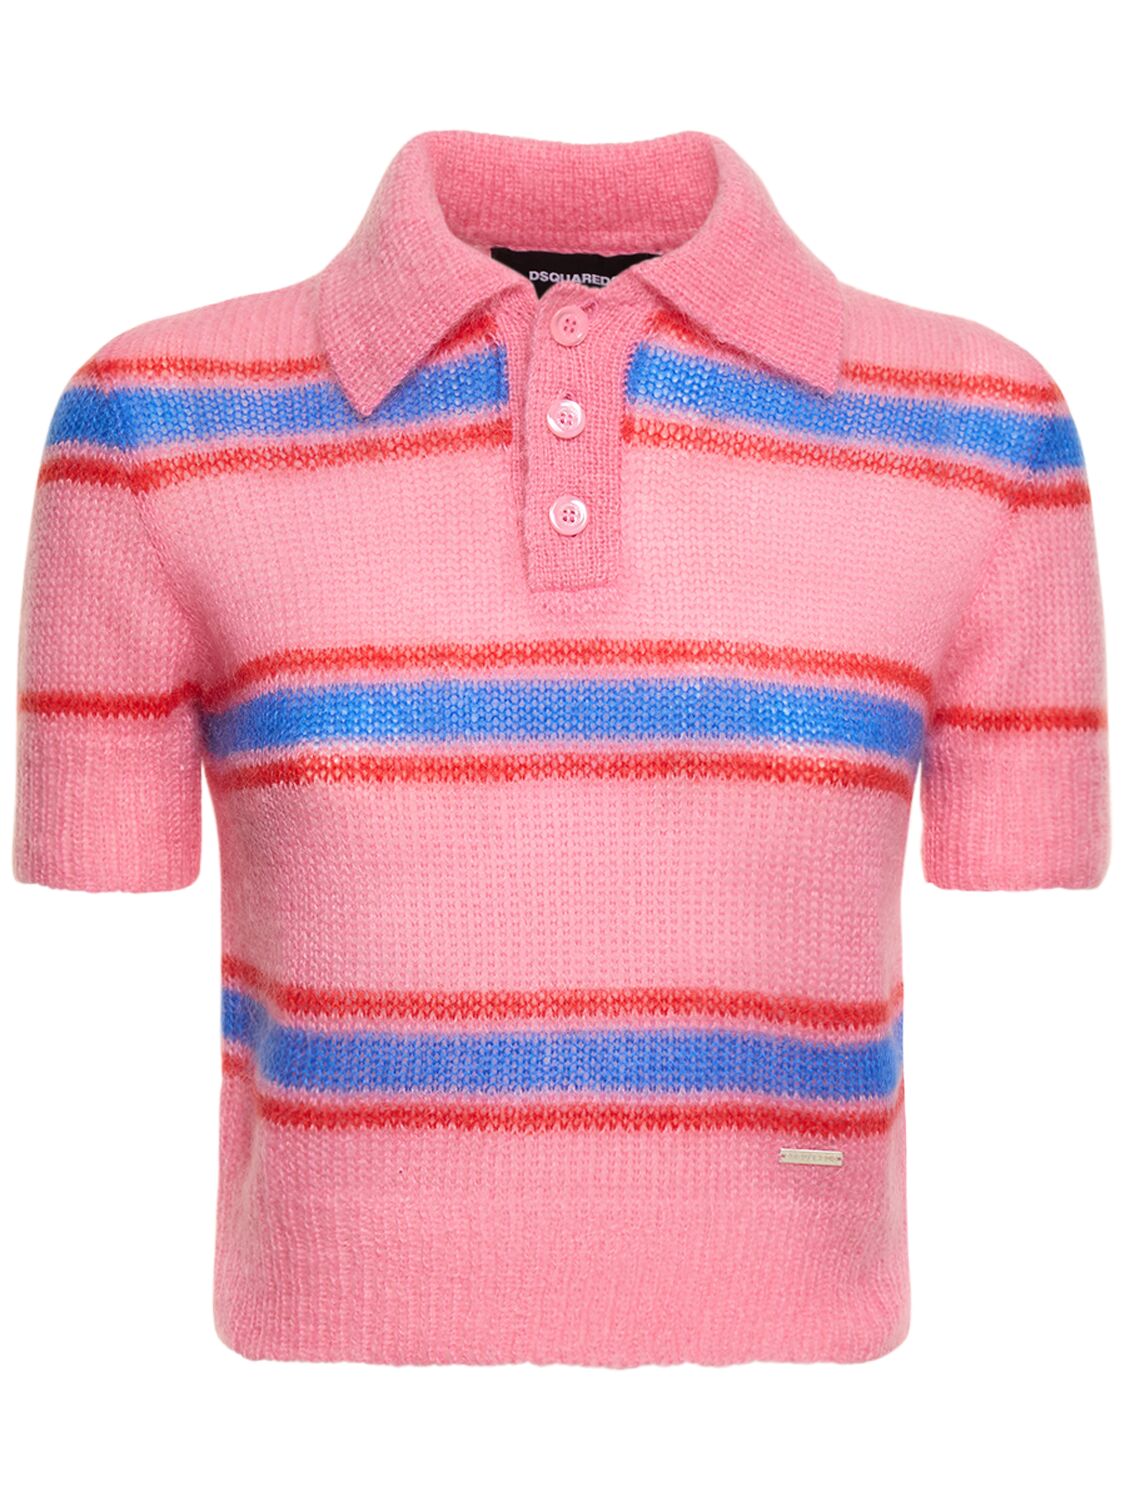 Dsquared2 Striped Brushed-knit Polo Top Pink,blue,red | ModeSens In